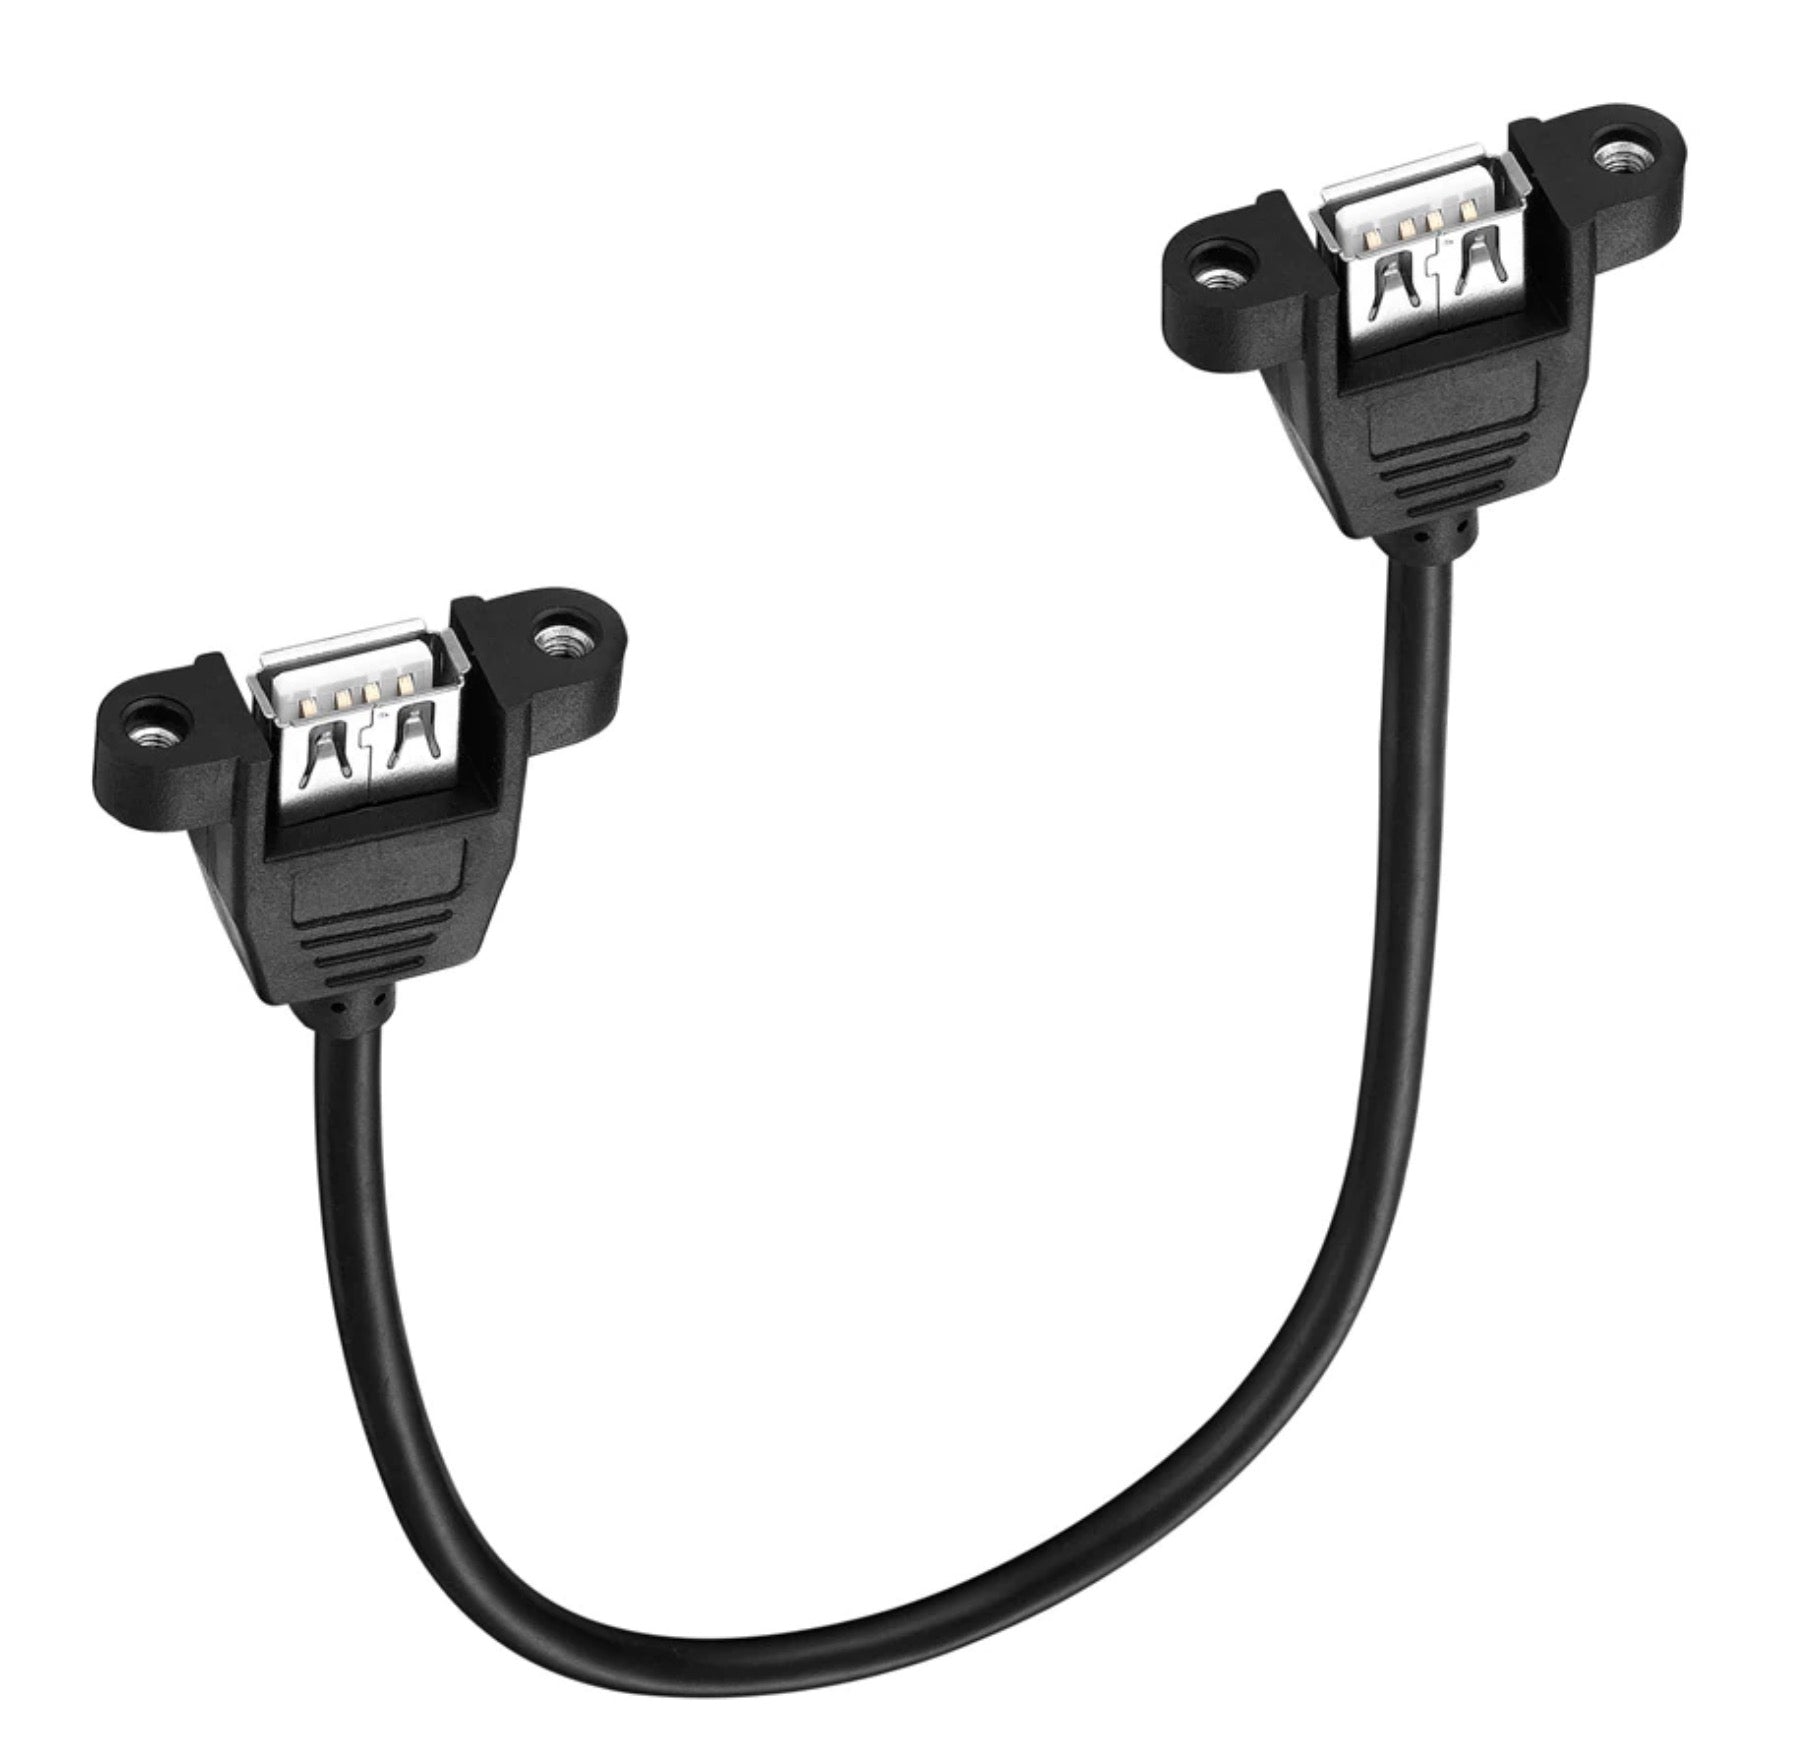 USB 2.0 Type A Female to Female Panel Mount Cable